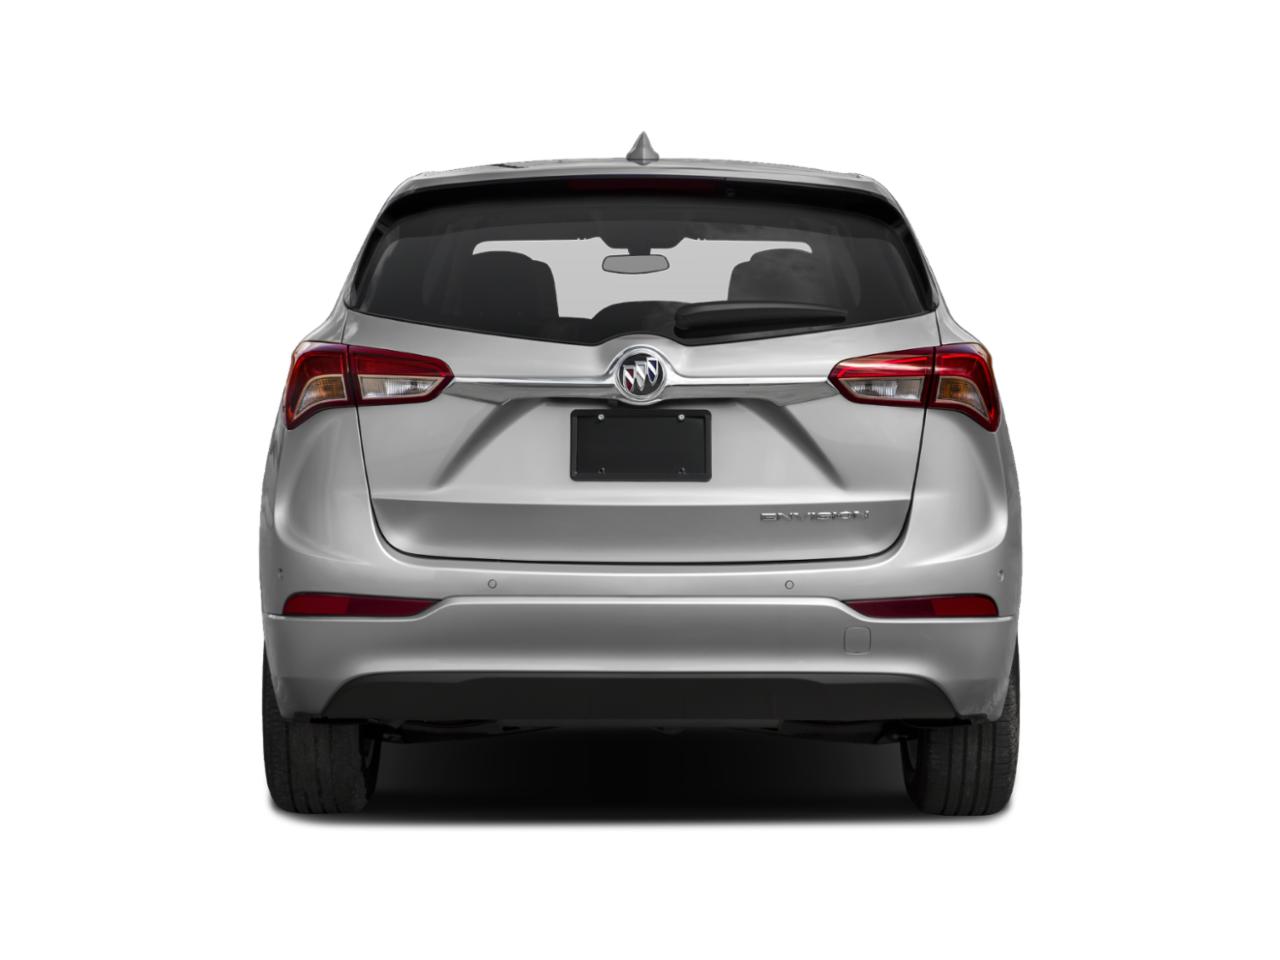 2020 Buick Envision Vehicle Photo in DETROIT, MI 48207-4102